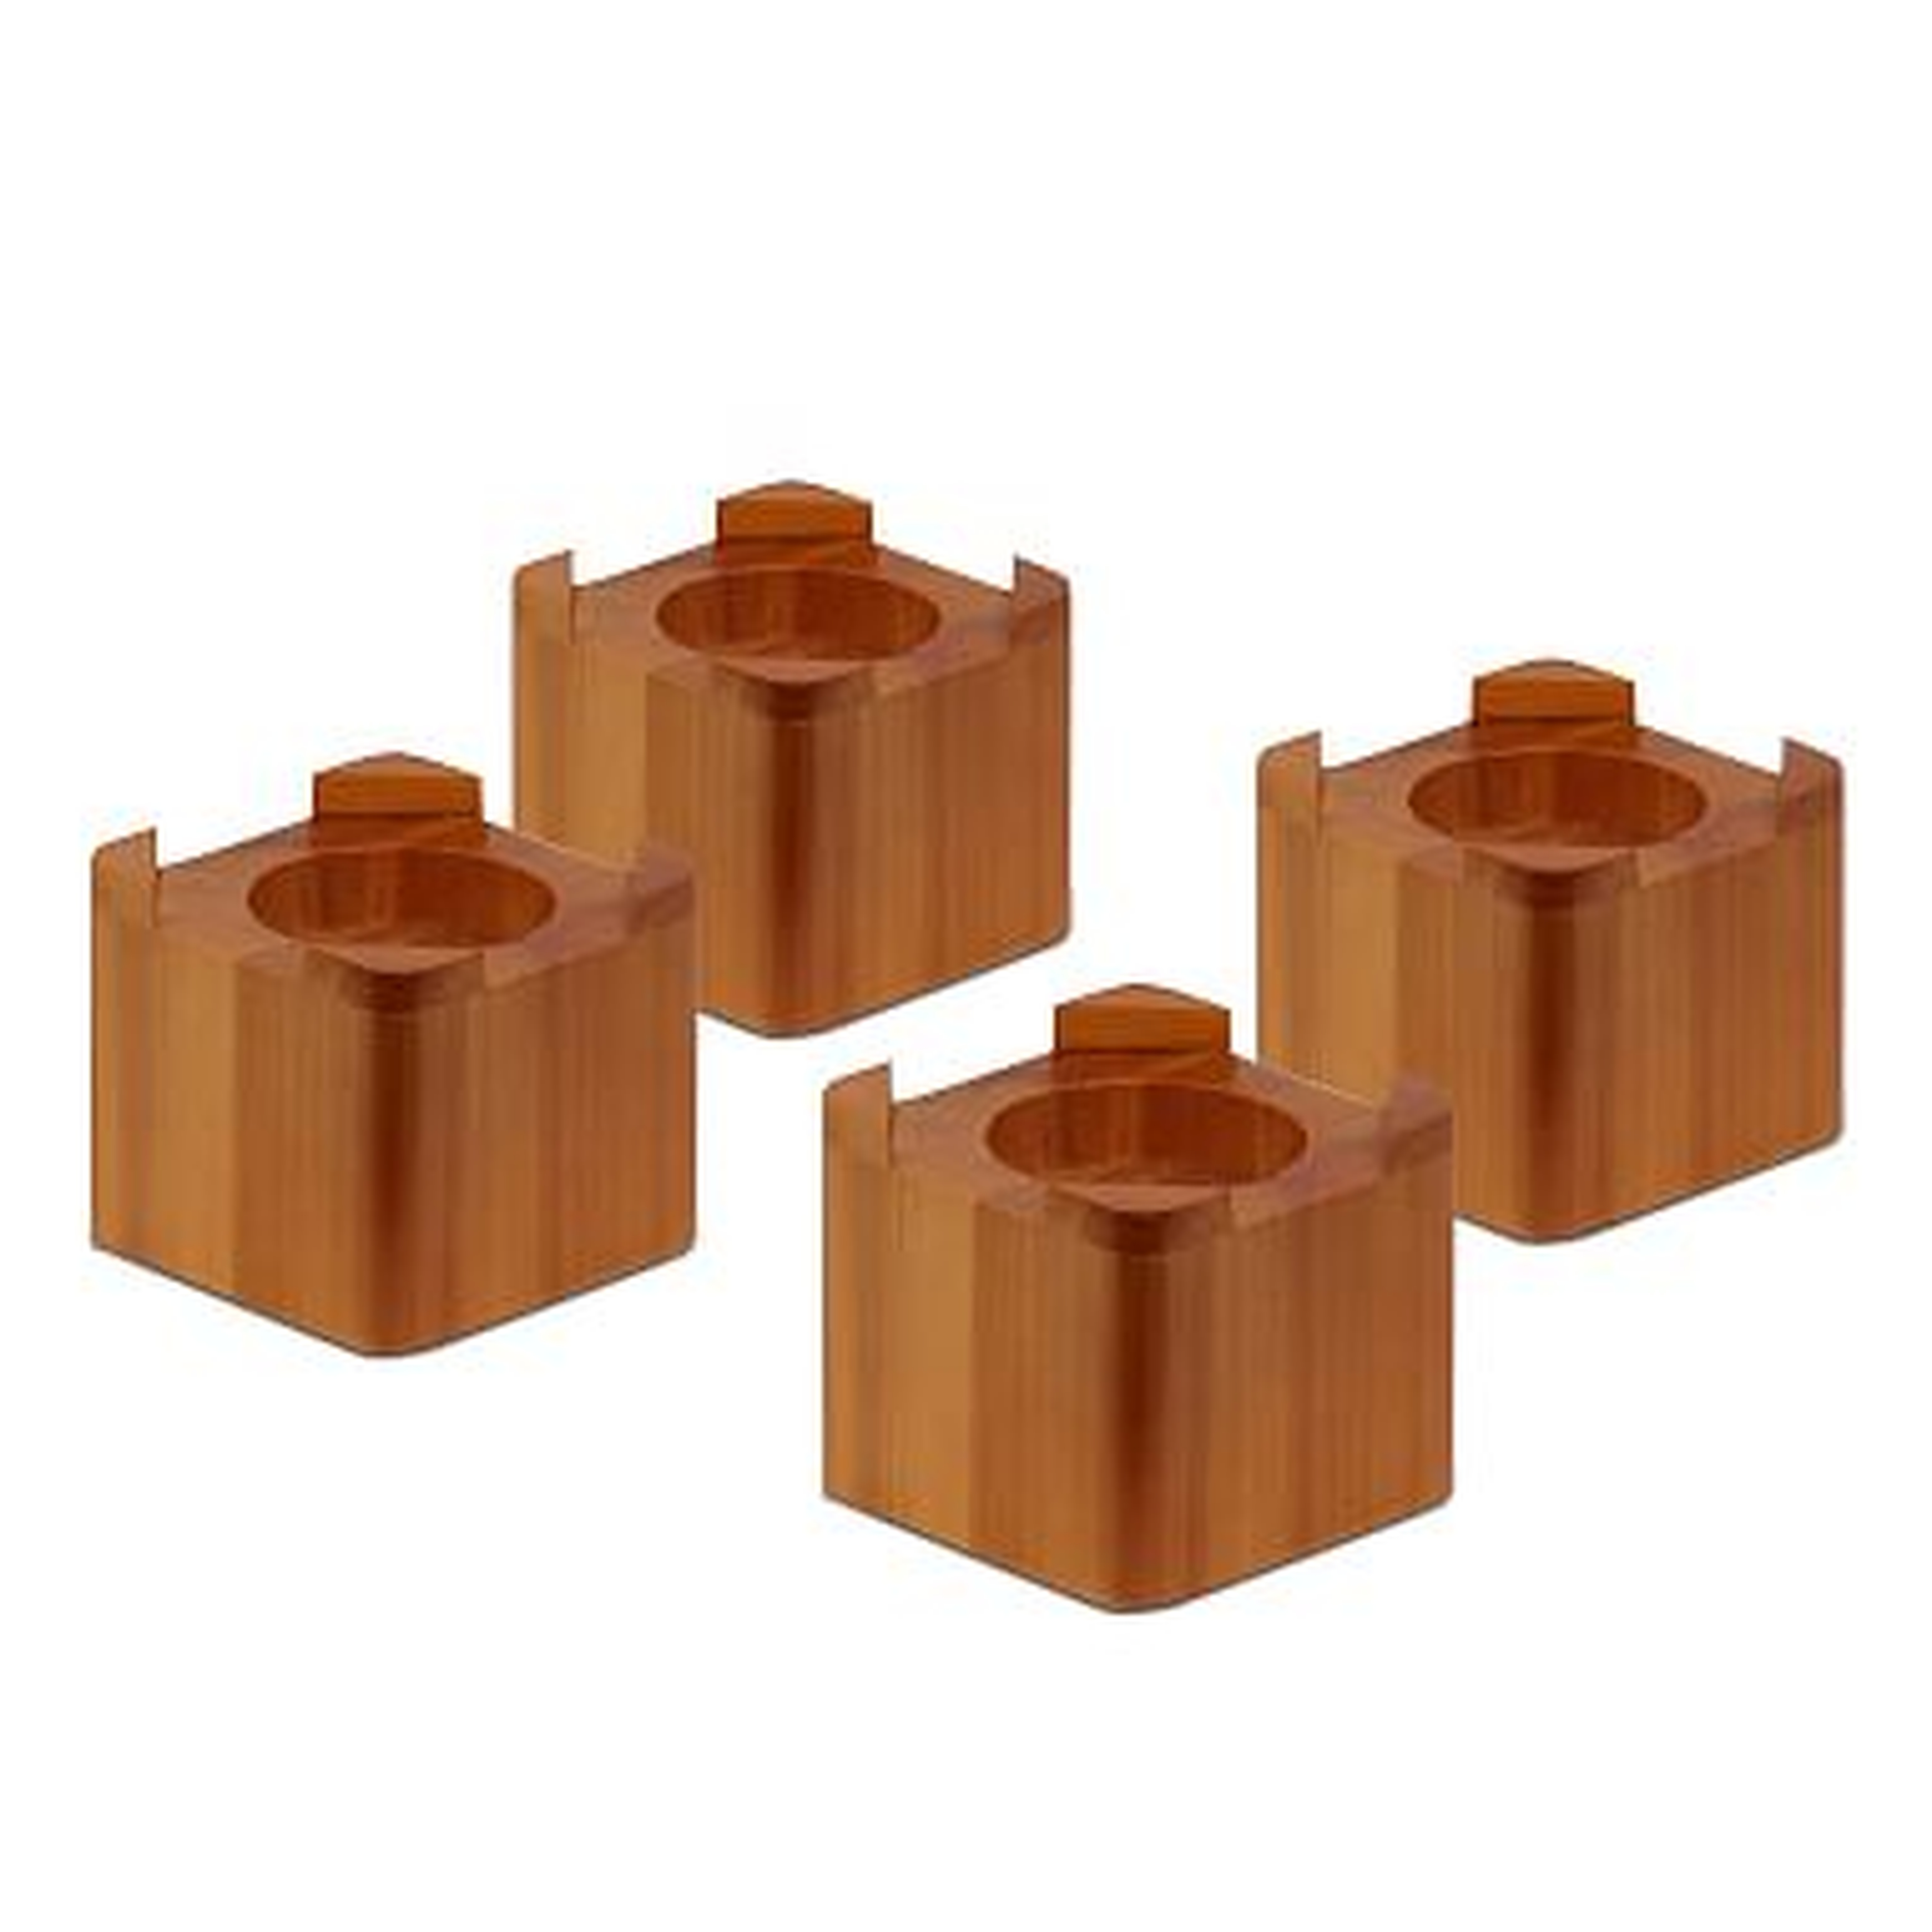 Square Bed Risers, Wood - Pottery Barn Teen